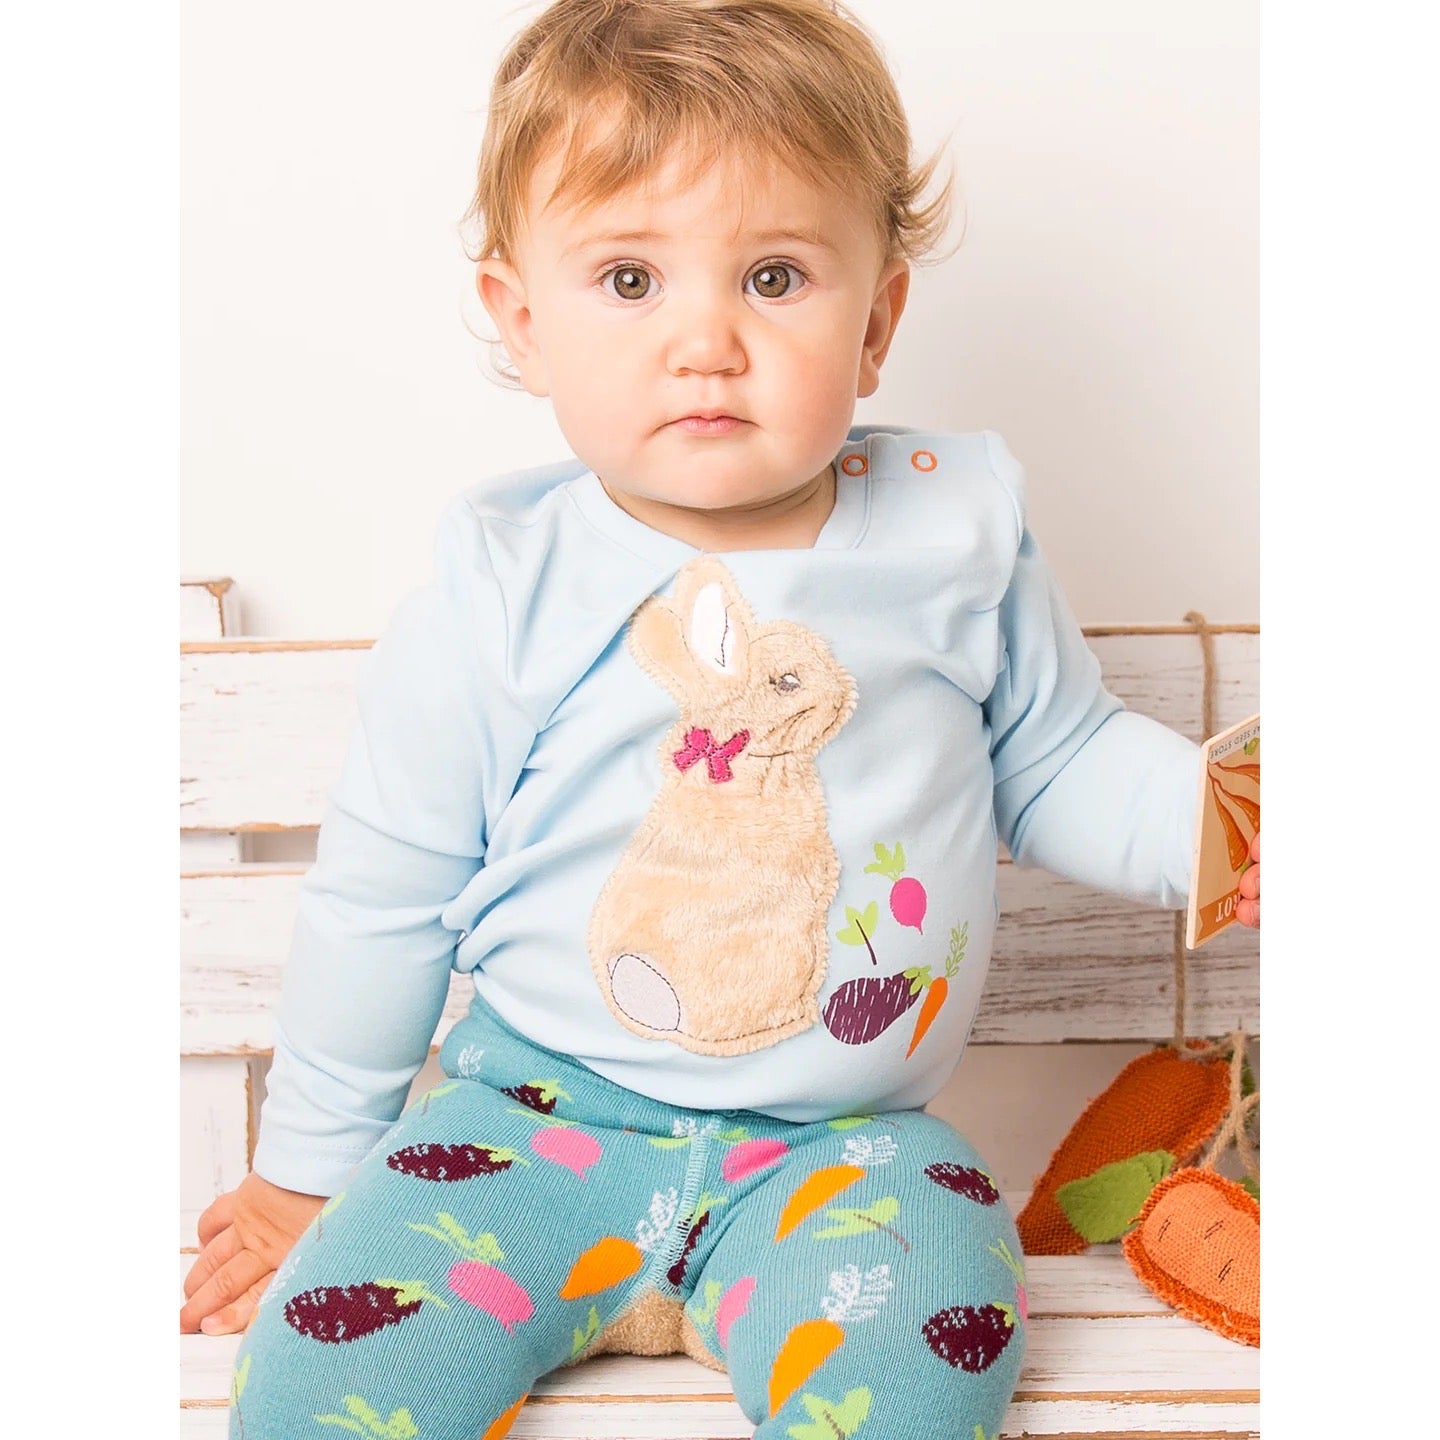 Blade & Rose Peter Rabbit Grow Your Own Infant T-Shirt Clothing 0-6M / Pale Blue,6-12M / Pale Blue,12-24M / Pale Blue